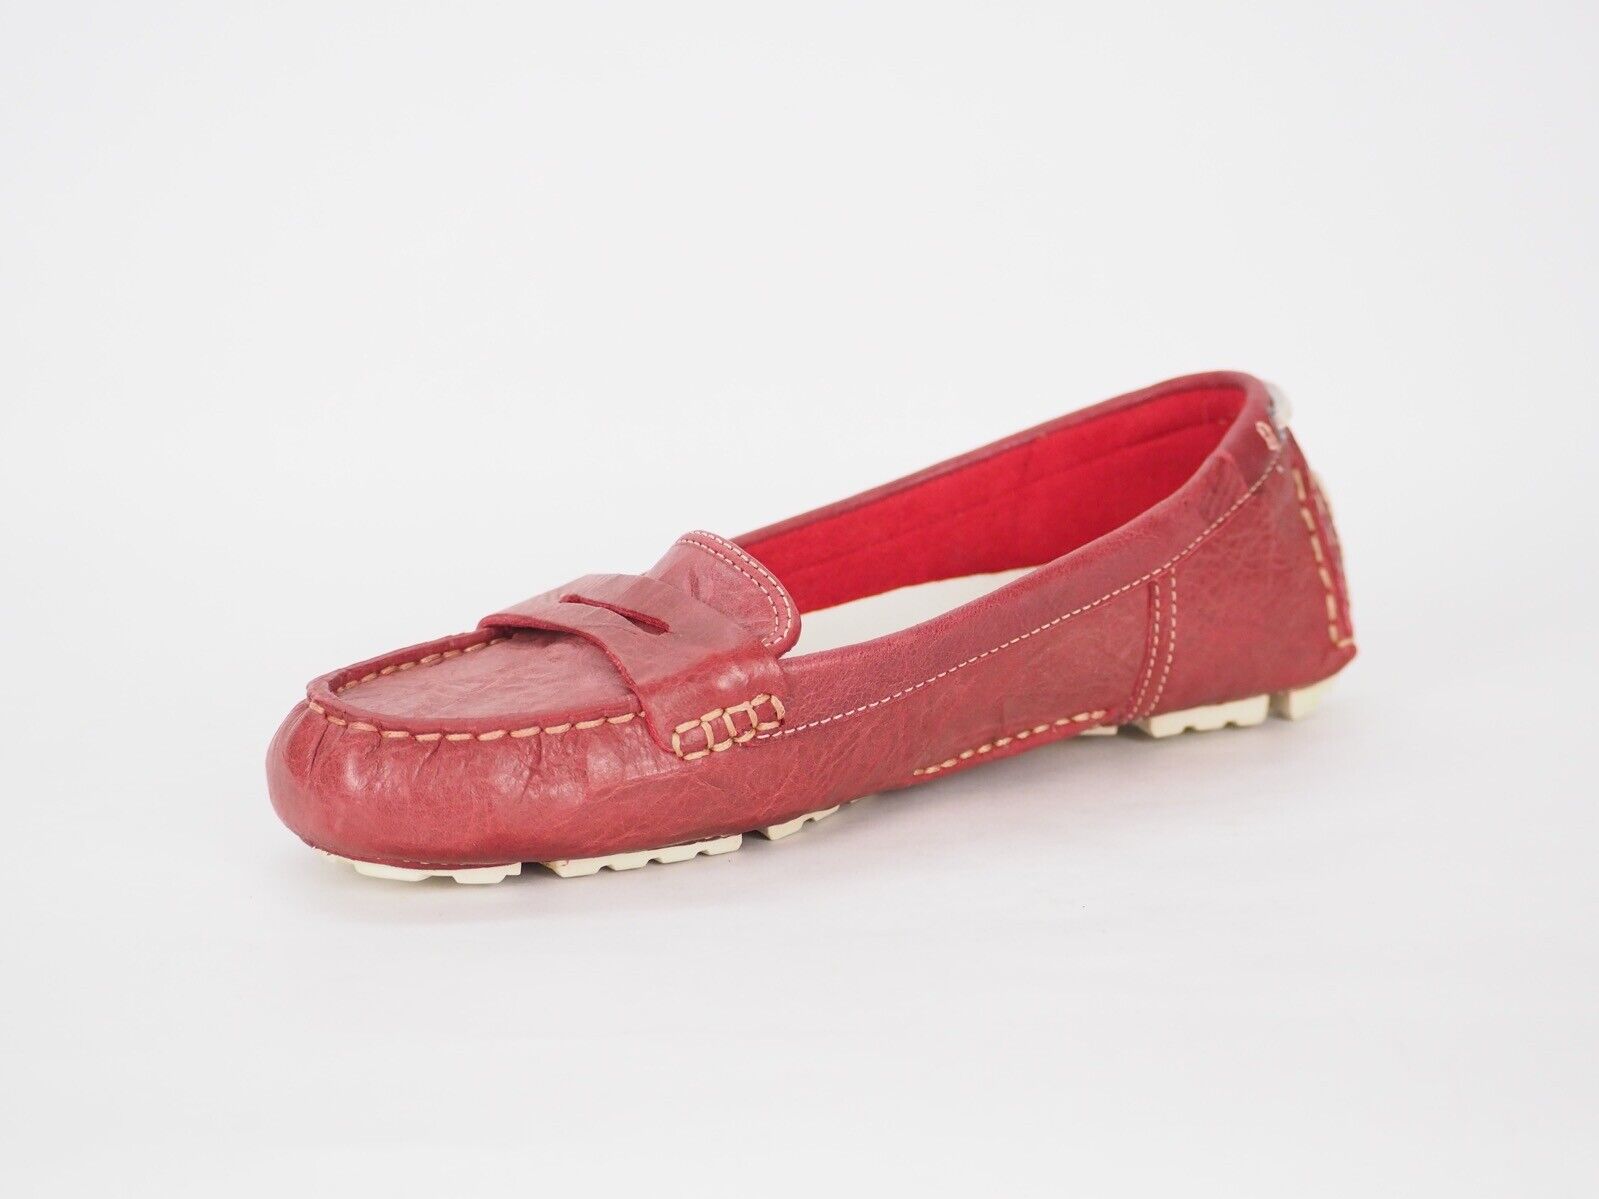 Womens Timberland Earthkeepers 27692 Red Leather Moccasins Casual Flats Shoes